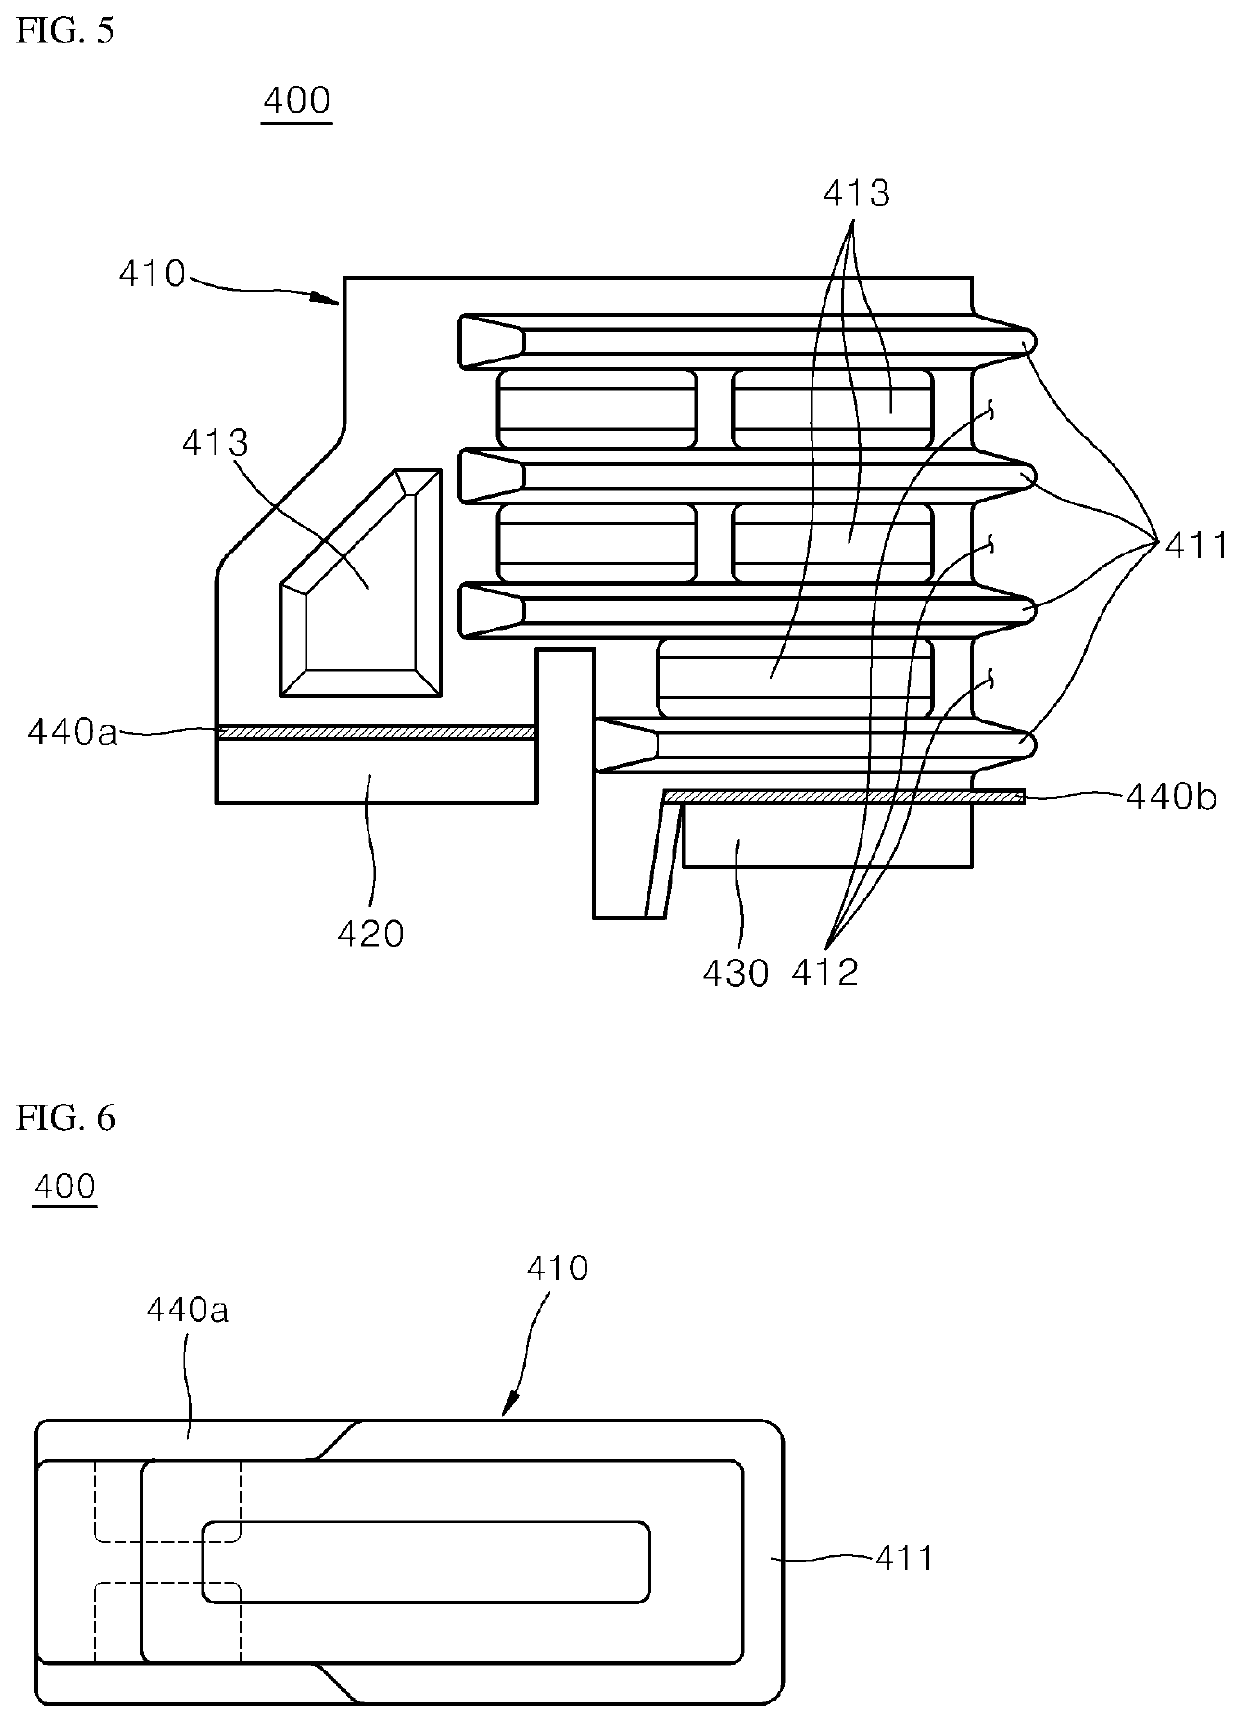 Coil spacer structure for molding transformer